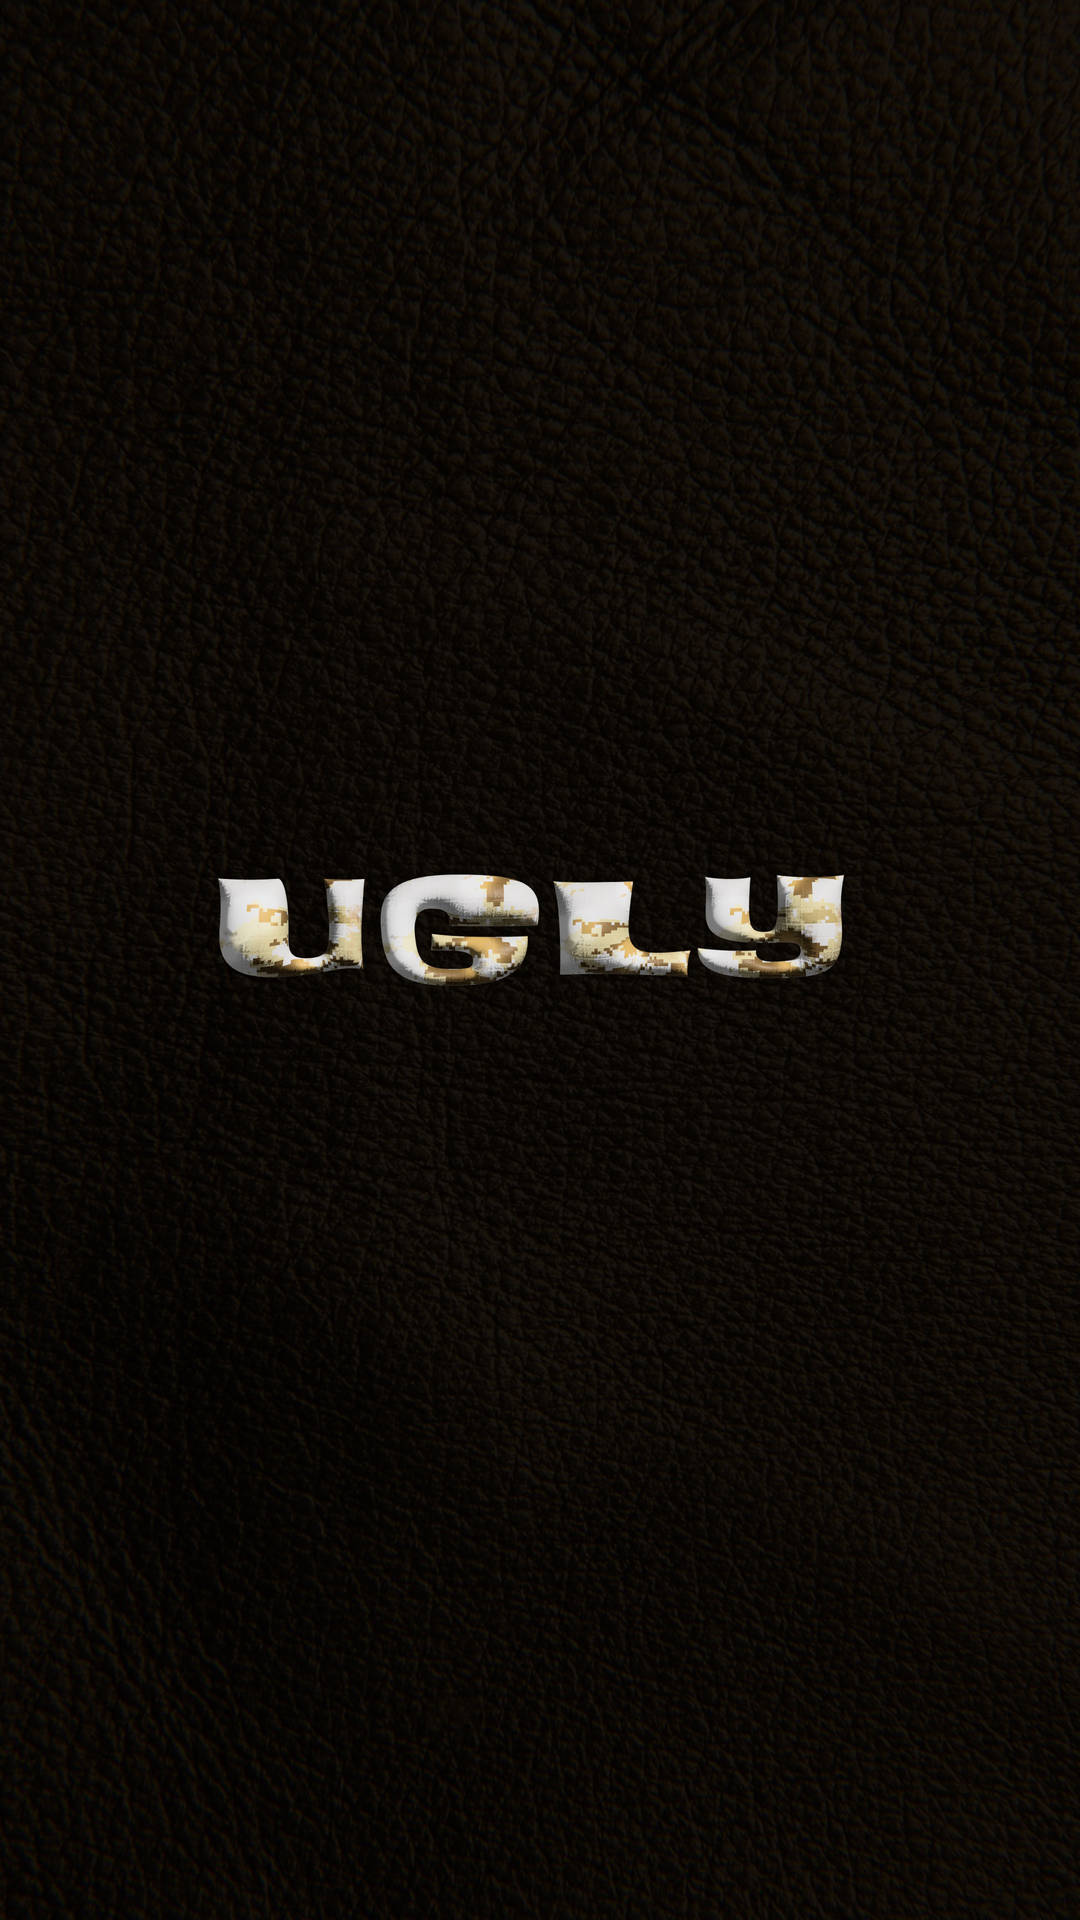 Ugly Leather-Textured Background Wallpaper